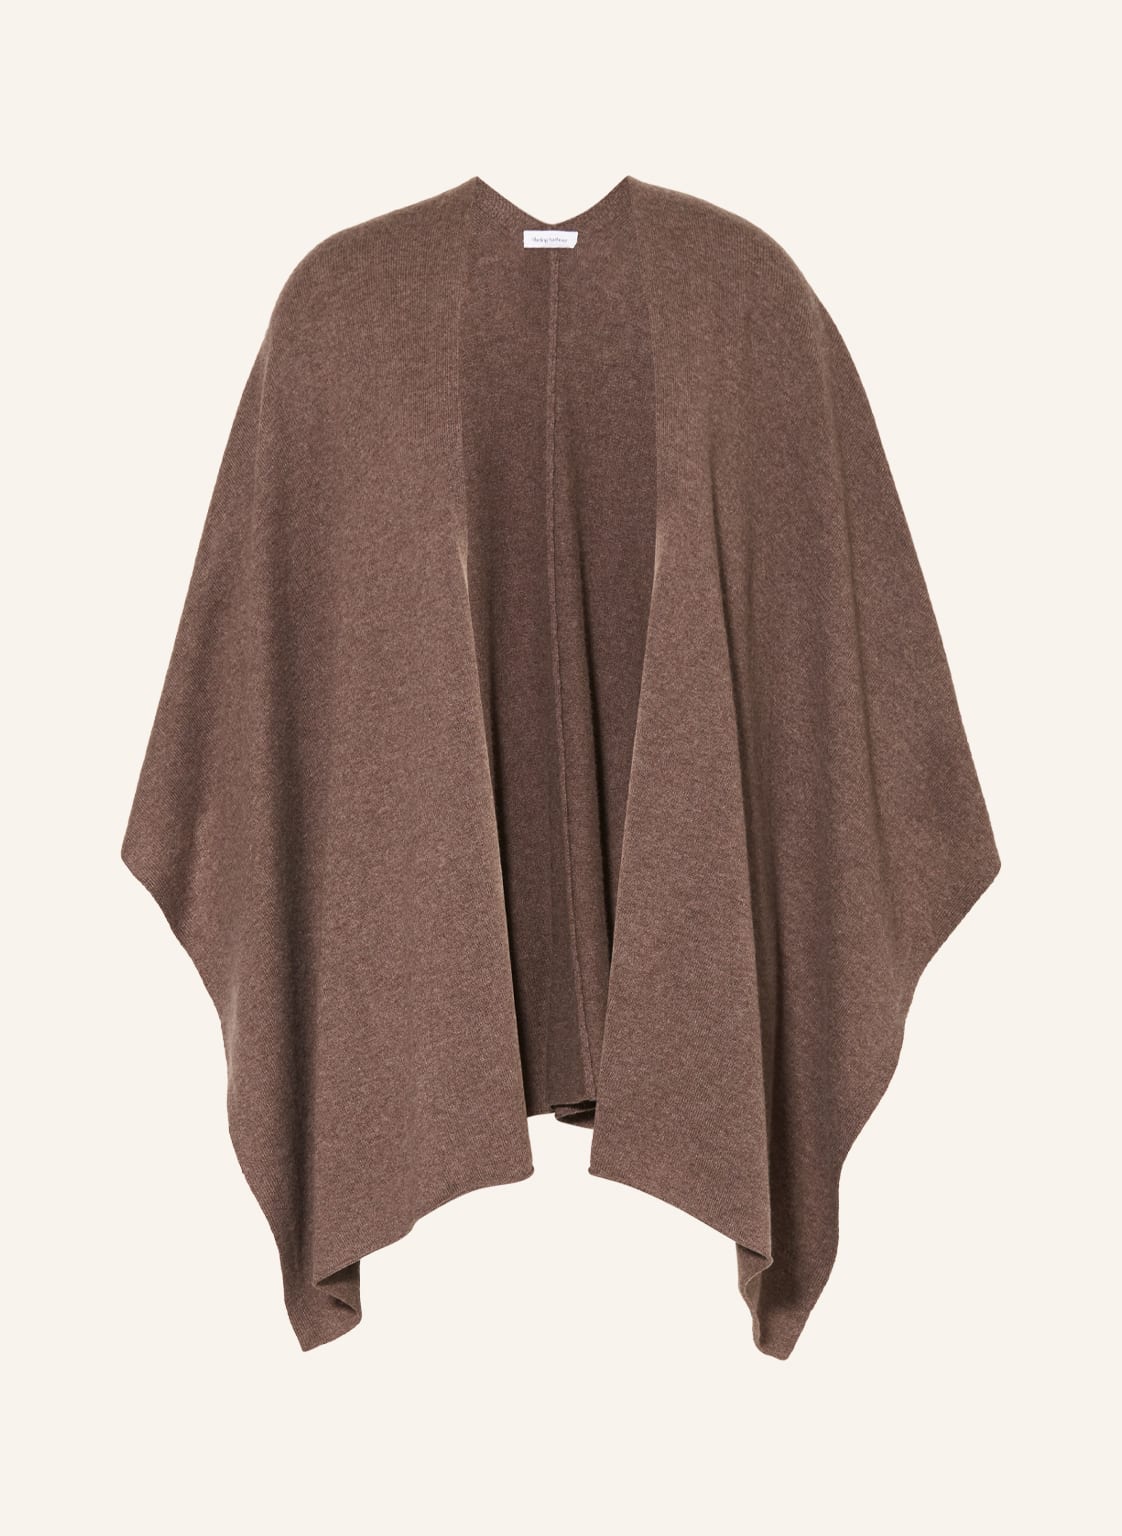 Image of Darling Harbour Cape Mit Cashmere braun